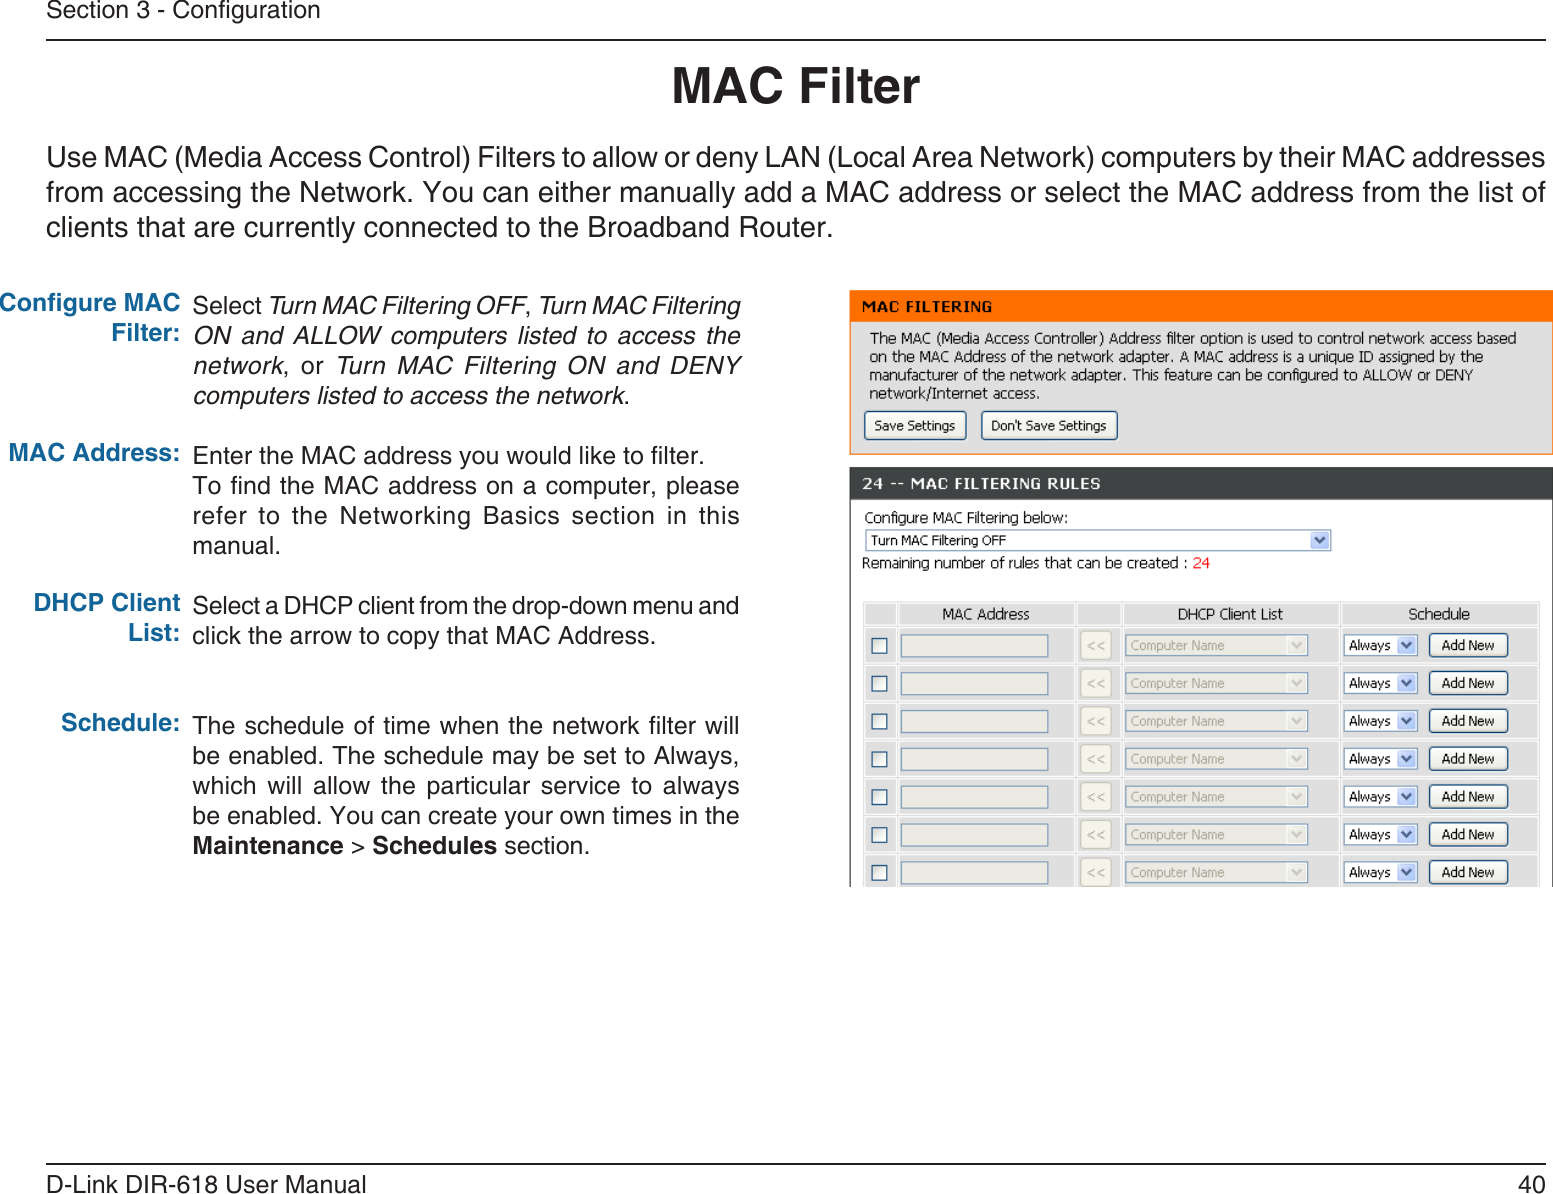 40D-Link DIR-618 User ManualSection 3 - CongurationMAC FilterSelect Turn MAC Filtering OFF, Turn MAC FilteringON  and  ALLOW  computers  listed  to  access  thenetwork, or Turn  MAC  Filtering  ON  and  DENYcomputers listed to access the network. Enter the MAC address you would like to lter.To nd the MAC address on a computer, please refer  to  the  Networking  Basics  section  in  thismanual.Select a DHCP client from the drop-down menu andclick the arrow to copy that MAC Address. The schedule of time when the network lter will be enabled. The schedule may be set to Always, which  will  allow  the  particular  service  to  alwaysbe enabled. You can create your own times in theMaintenance &gt; Schedules section.Congure MAC Filter:MAC Address: DHCP Client List:Schedule:Use MAC (Media Access Control) Filters to allow or deny LAN (Local Area Network) computers by their MAC addressesfrom accessing the Network. You can either manually add a MAC address or select the MAC address from the list ofclients that are currently connected to the Broadband Router.